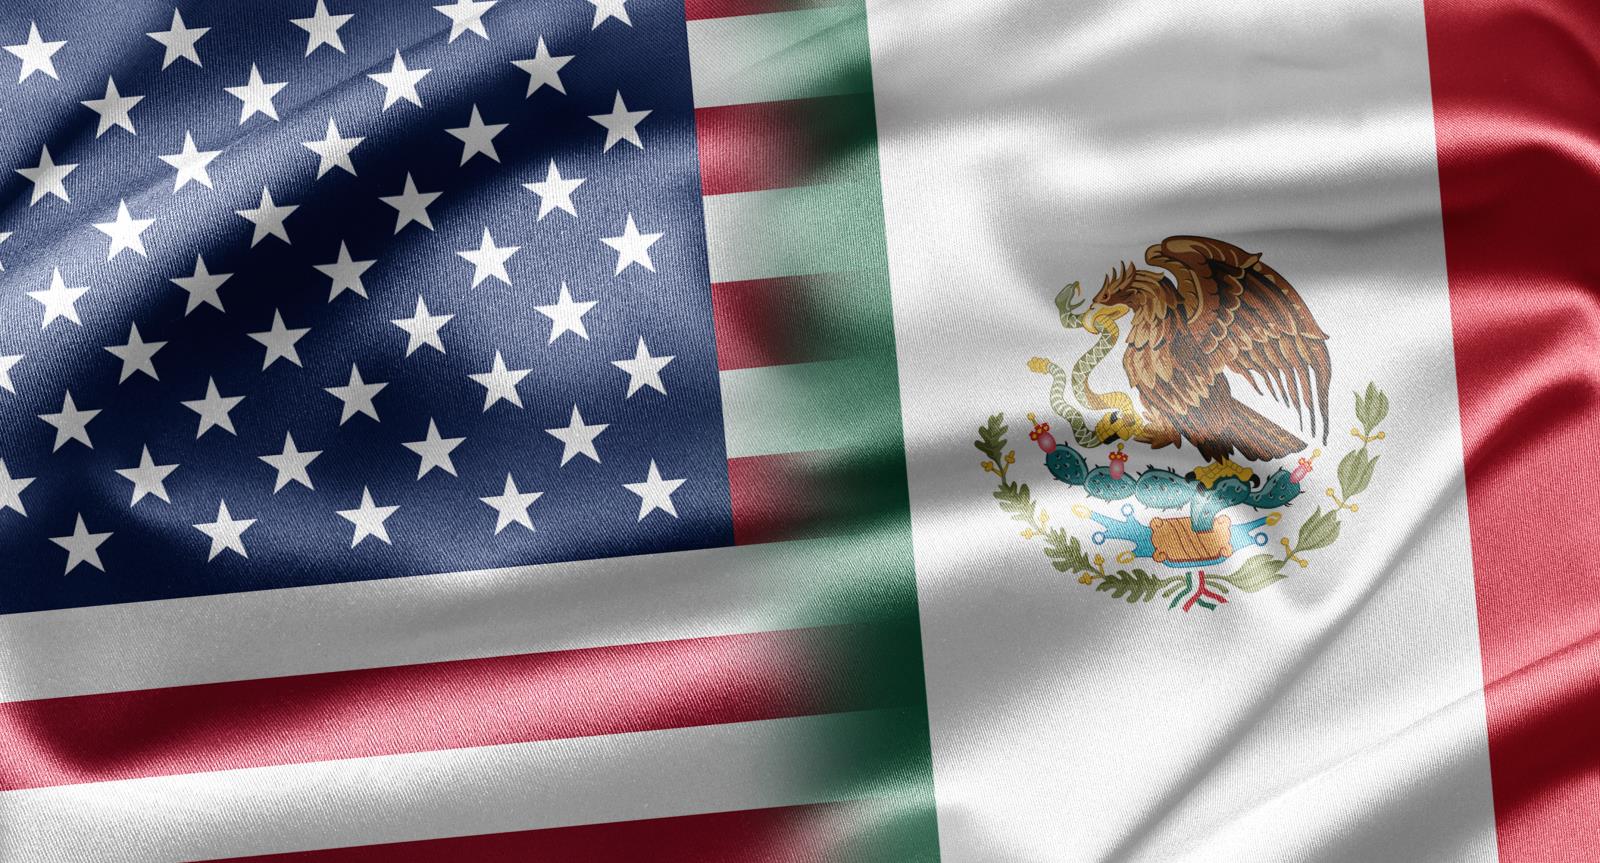 The Mexican Supreme Court has unanimously ruled in favor of U.S. potato growers in a case that should result in all of Mexico being opened up to imports of fresh potatoes from the United States.